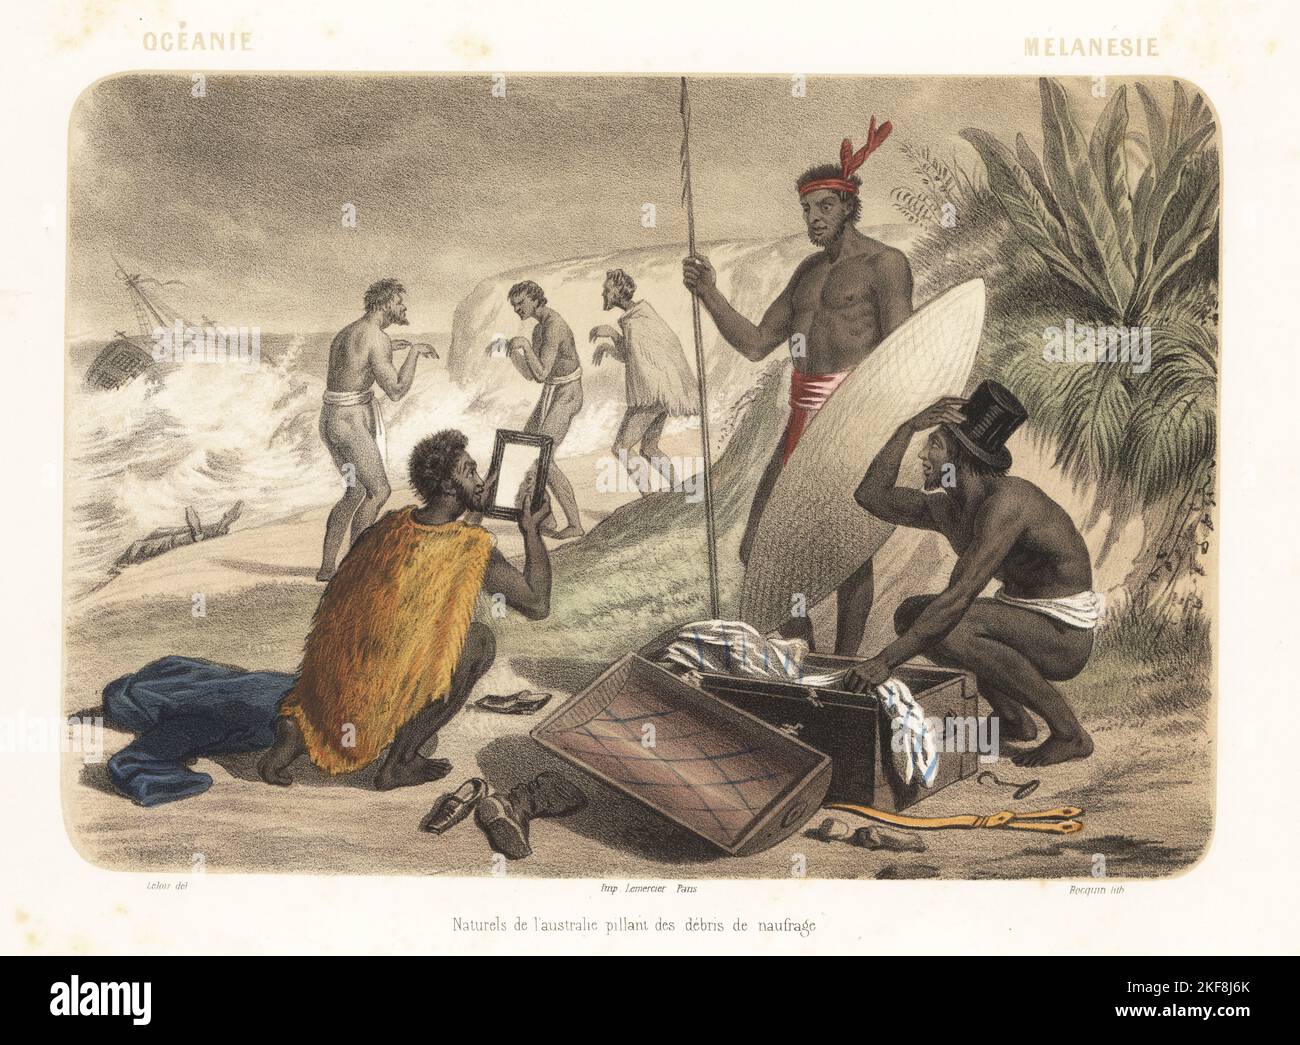 Costumes of Australia, Oceania, 1858. Aborigine men examining flotsam from a European shipwreck on a beach. In loincloths and capes, armed with spear and shield, they hold a top hat and hand mirror. Naturels de l'Australie pillant des debris de naufrage. Handcoloured and sepia-tinted lithograph by Jean-Adolphe Bocquin after an illustration by Auguste Leloir from Elisabeth Muller (pseudonym of Leonie Bedelet)’s Le Monde en Estampes, The World in Prints, Amadee Bedelet, Paris, 1858. Stock Photo